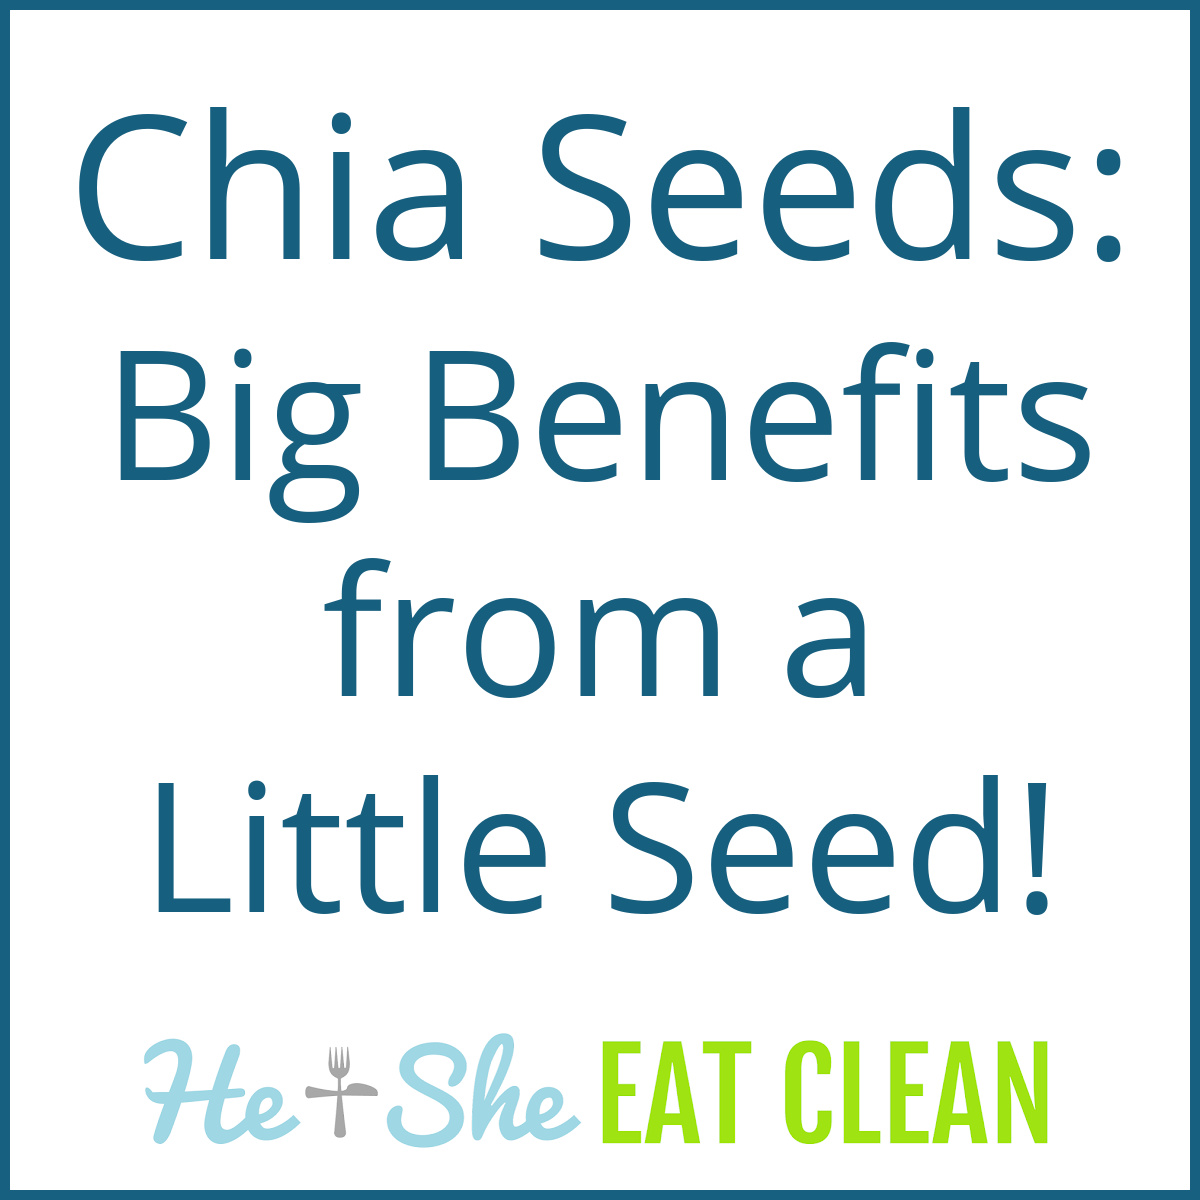 text reads Chia Seeds - Big Benefits from a Little Seed!